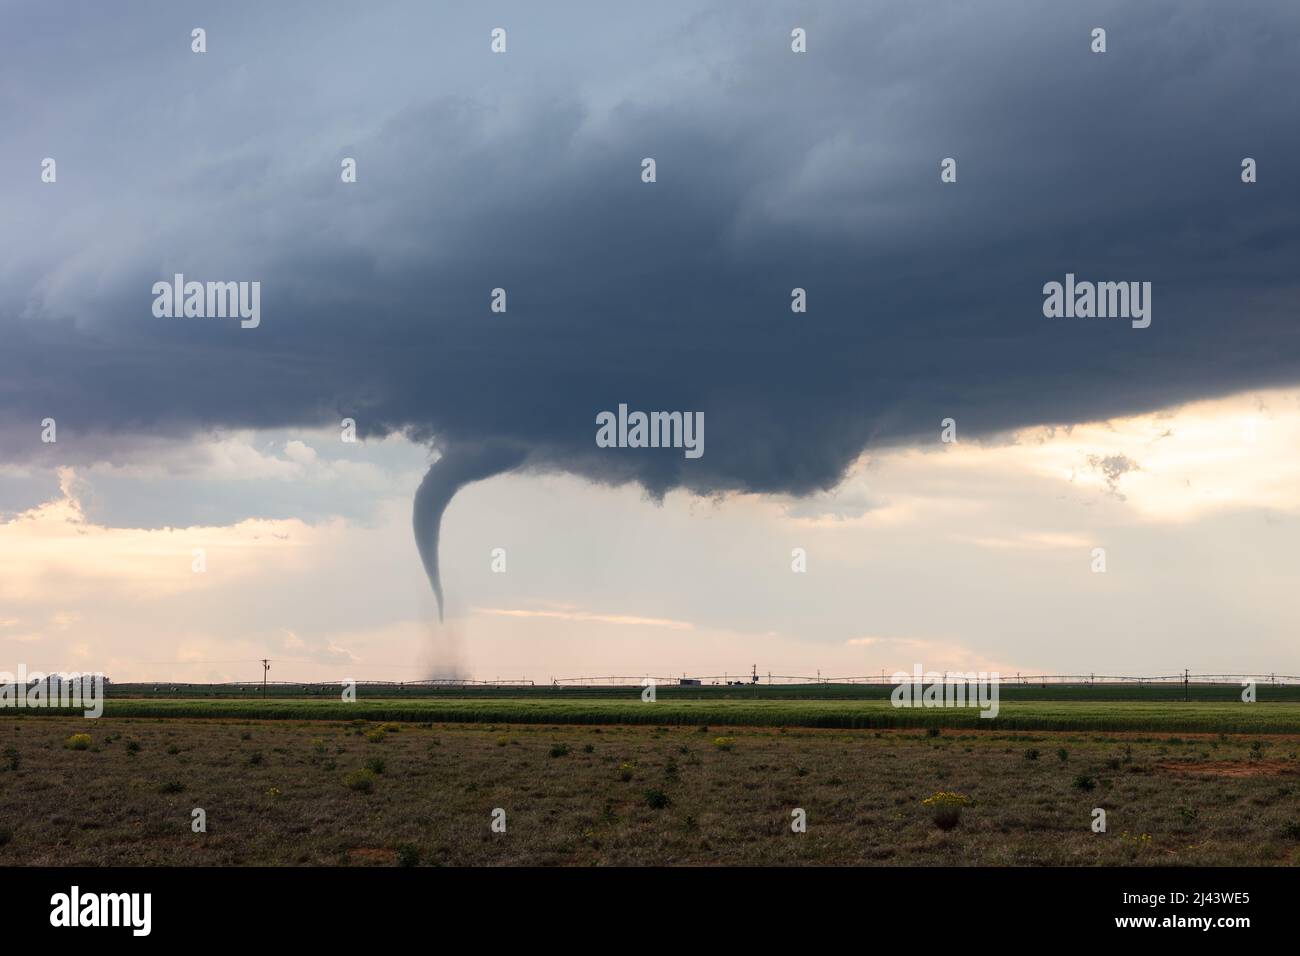 A tornado with storm clouds during a severe weather event near Amherst, Texas, USA Stock Photo